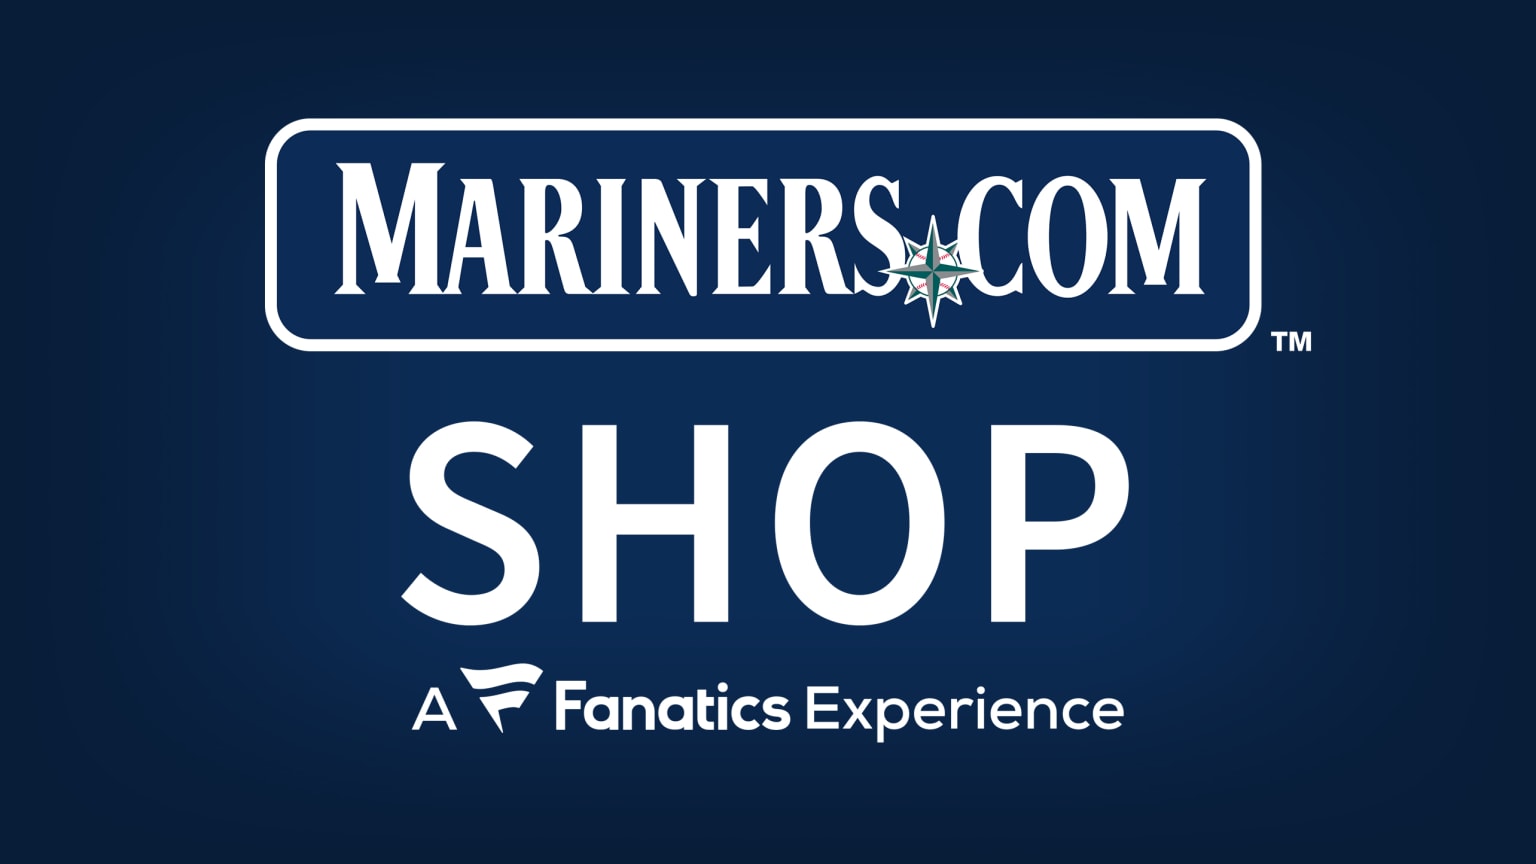 MLB Mariners Regular : Download For Free, View Sample Text, Rating And More  On